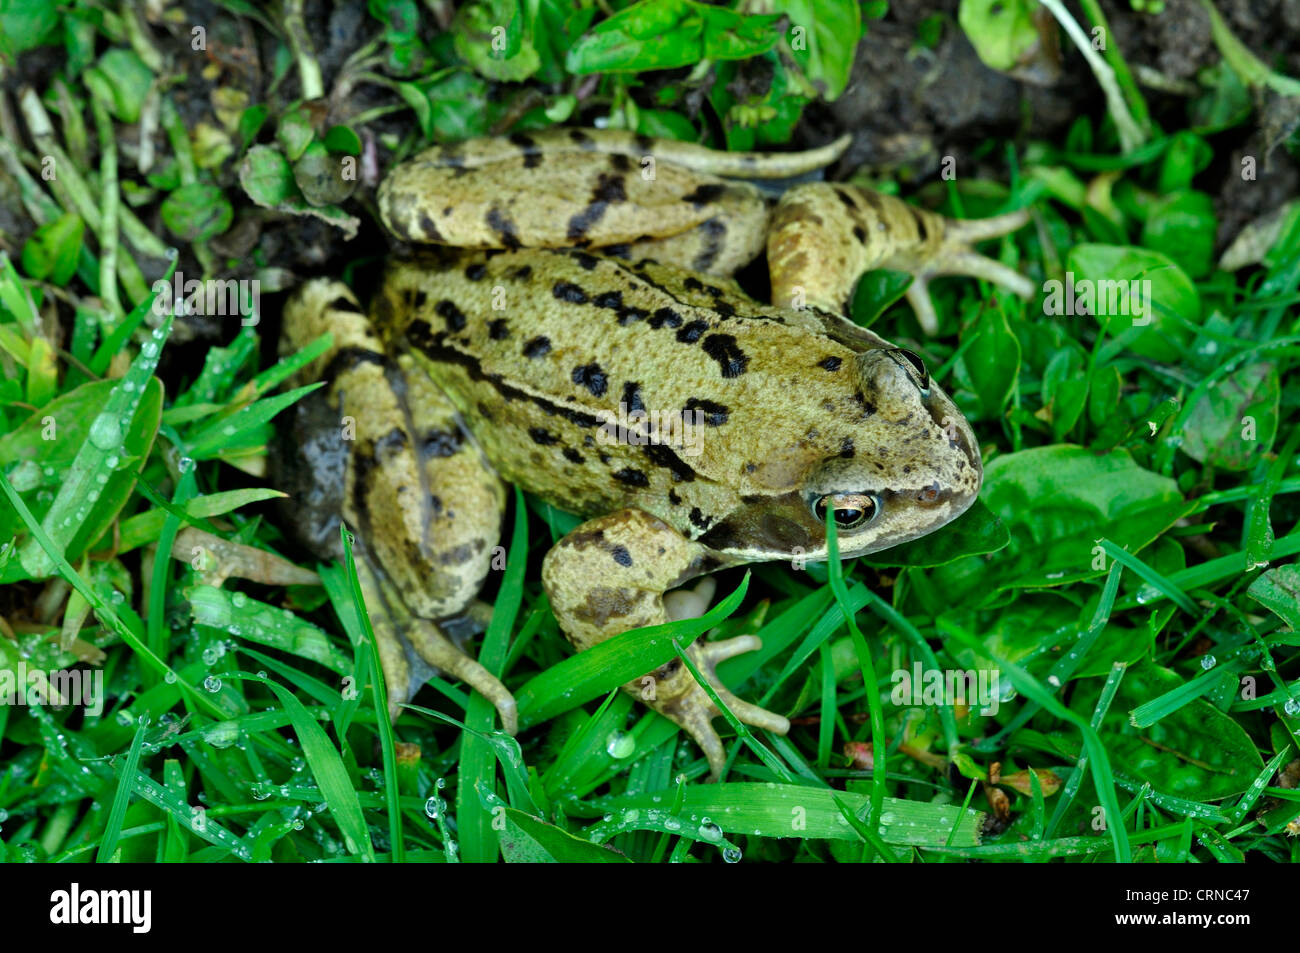 A common frog on wet grass UK Stock Photo